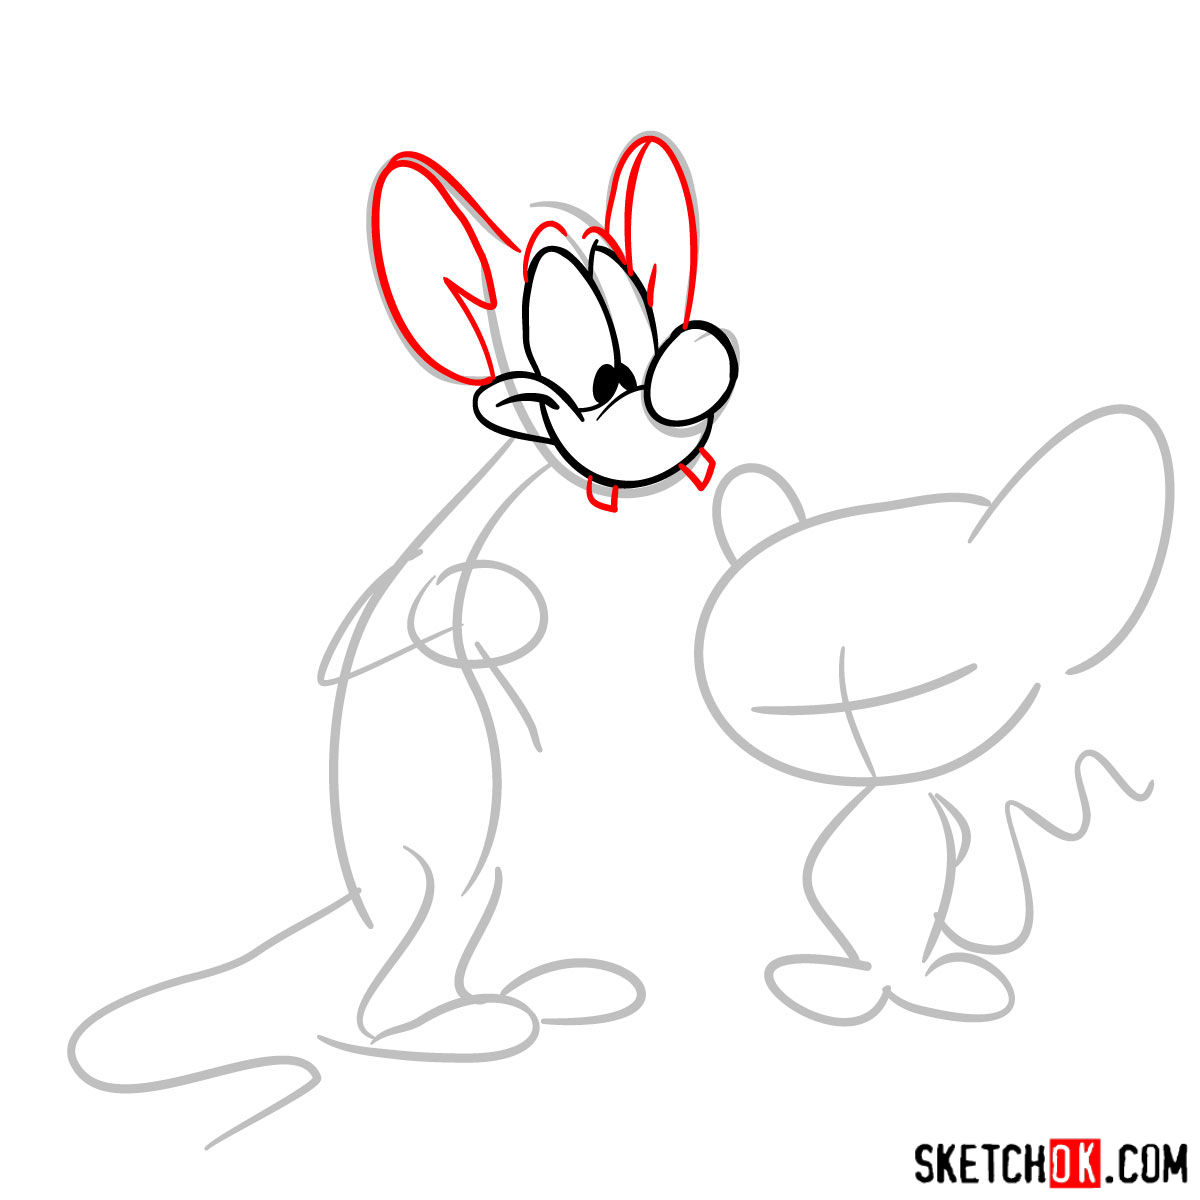 How to draw Pinky and the Brain together - step 03